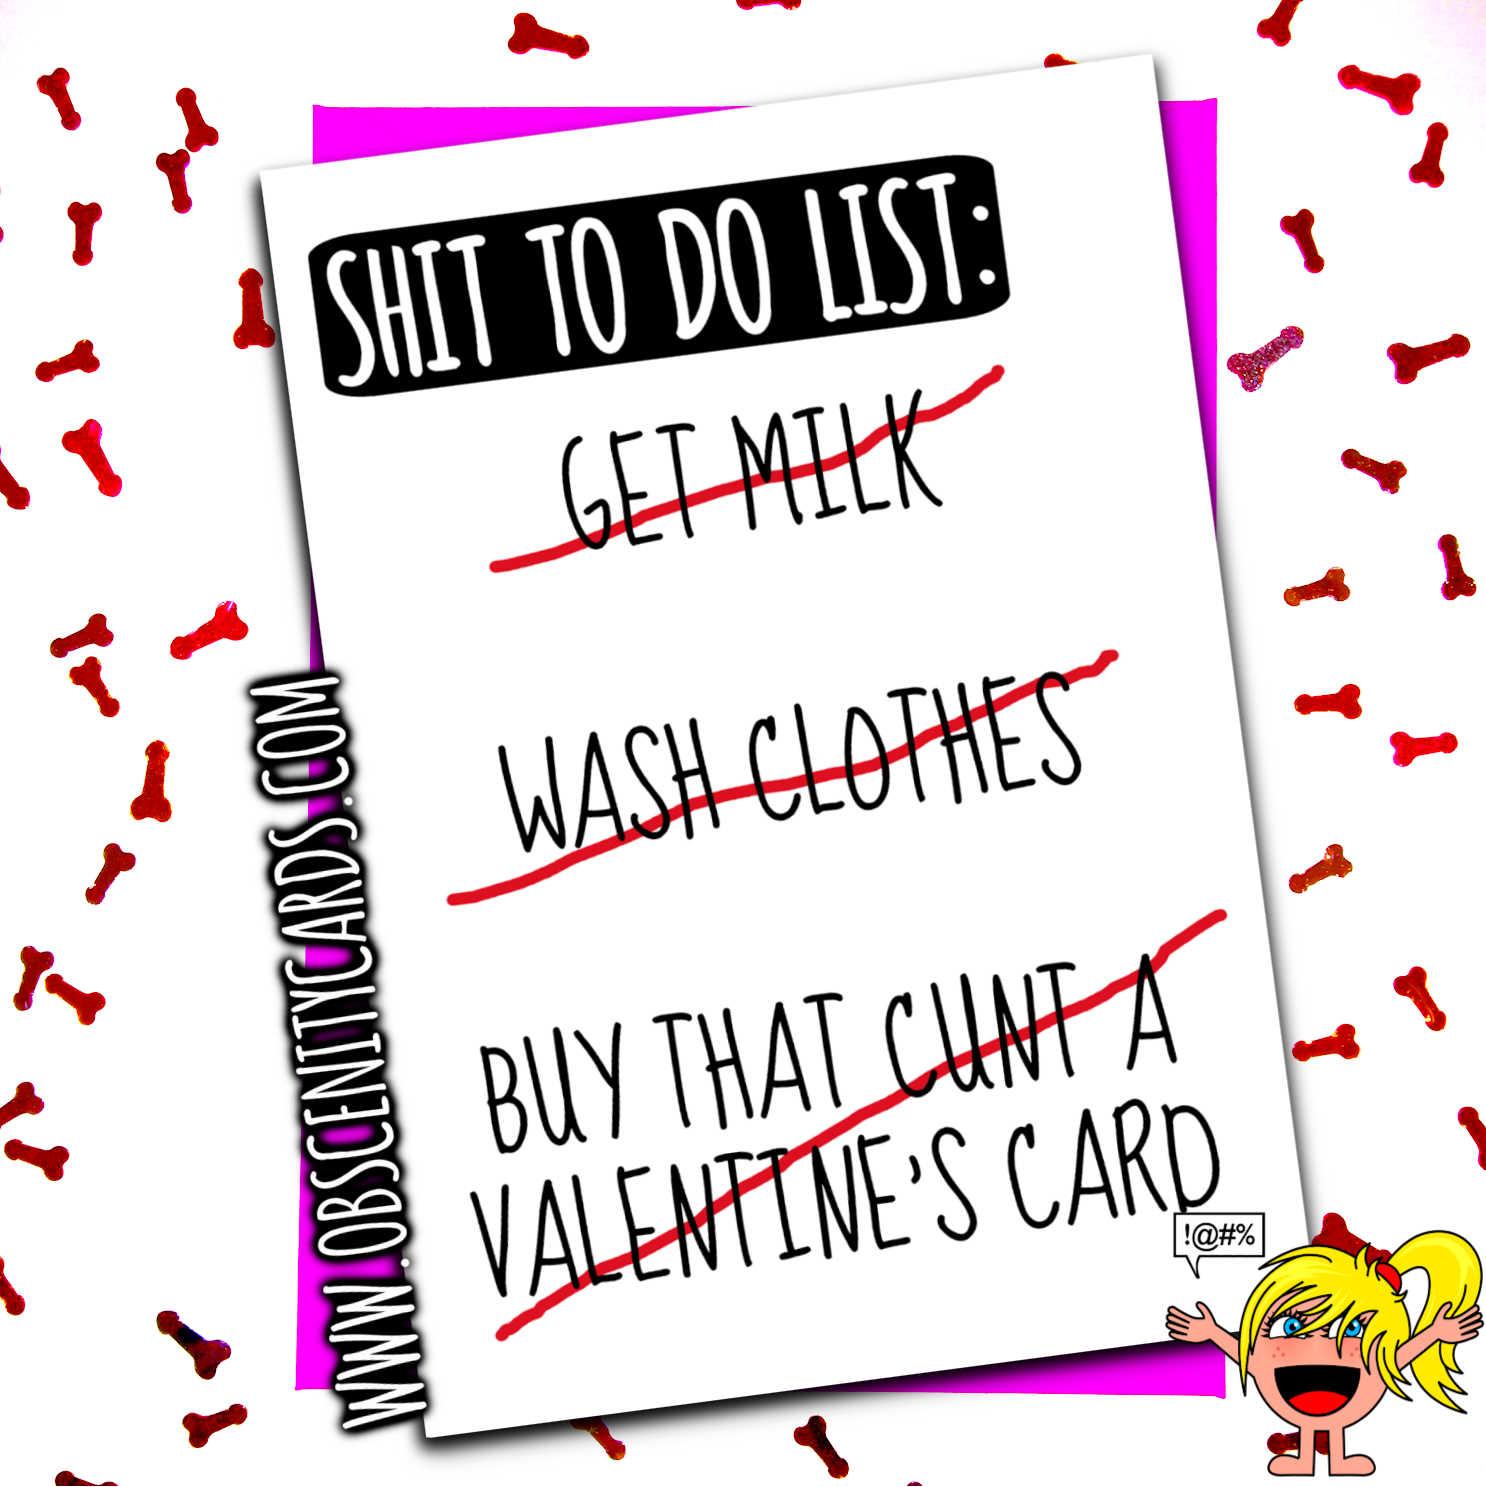 SHIT TO DO LIST - BUY THAT CUNT A VALENTINE'S DAY CARD